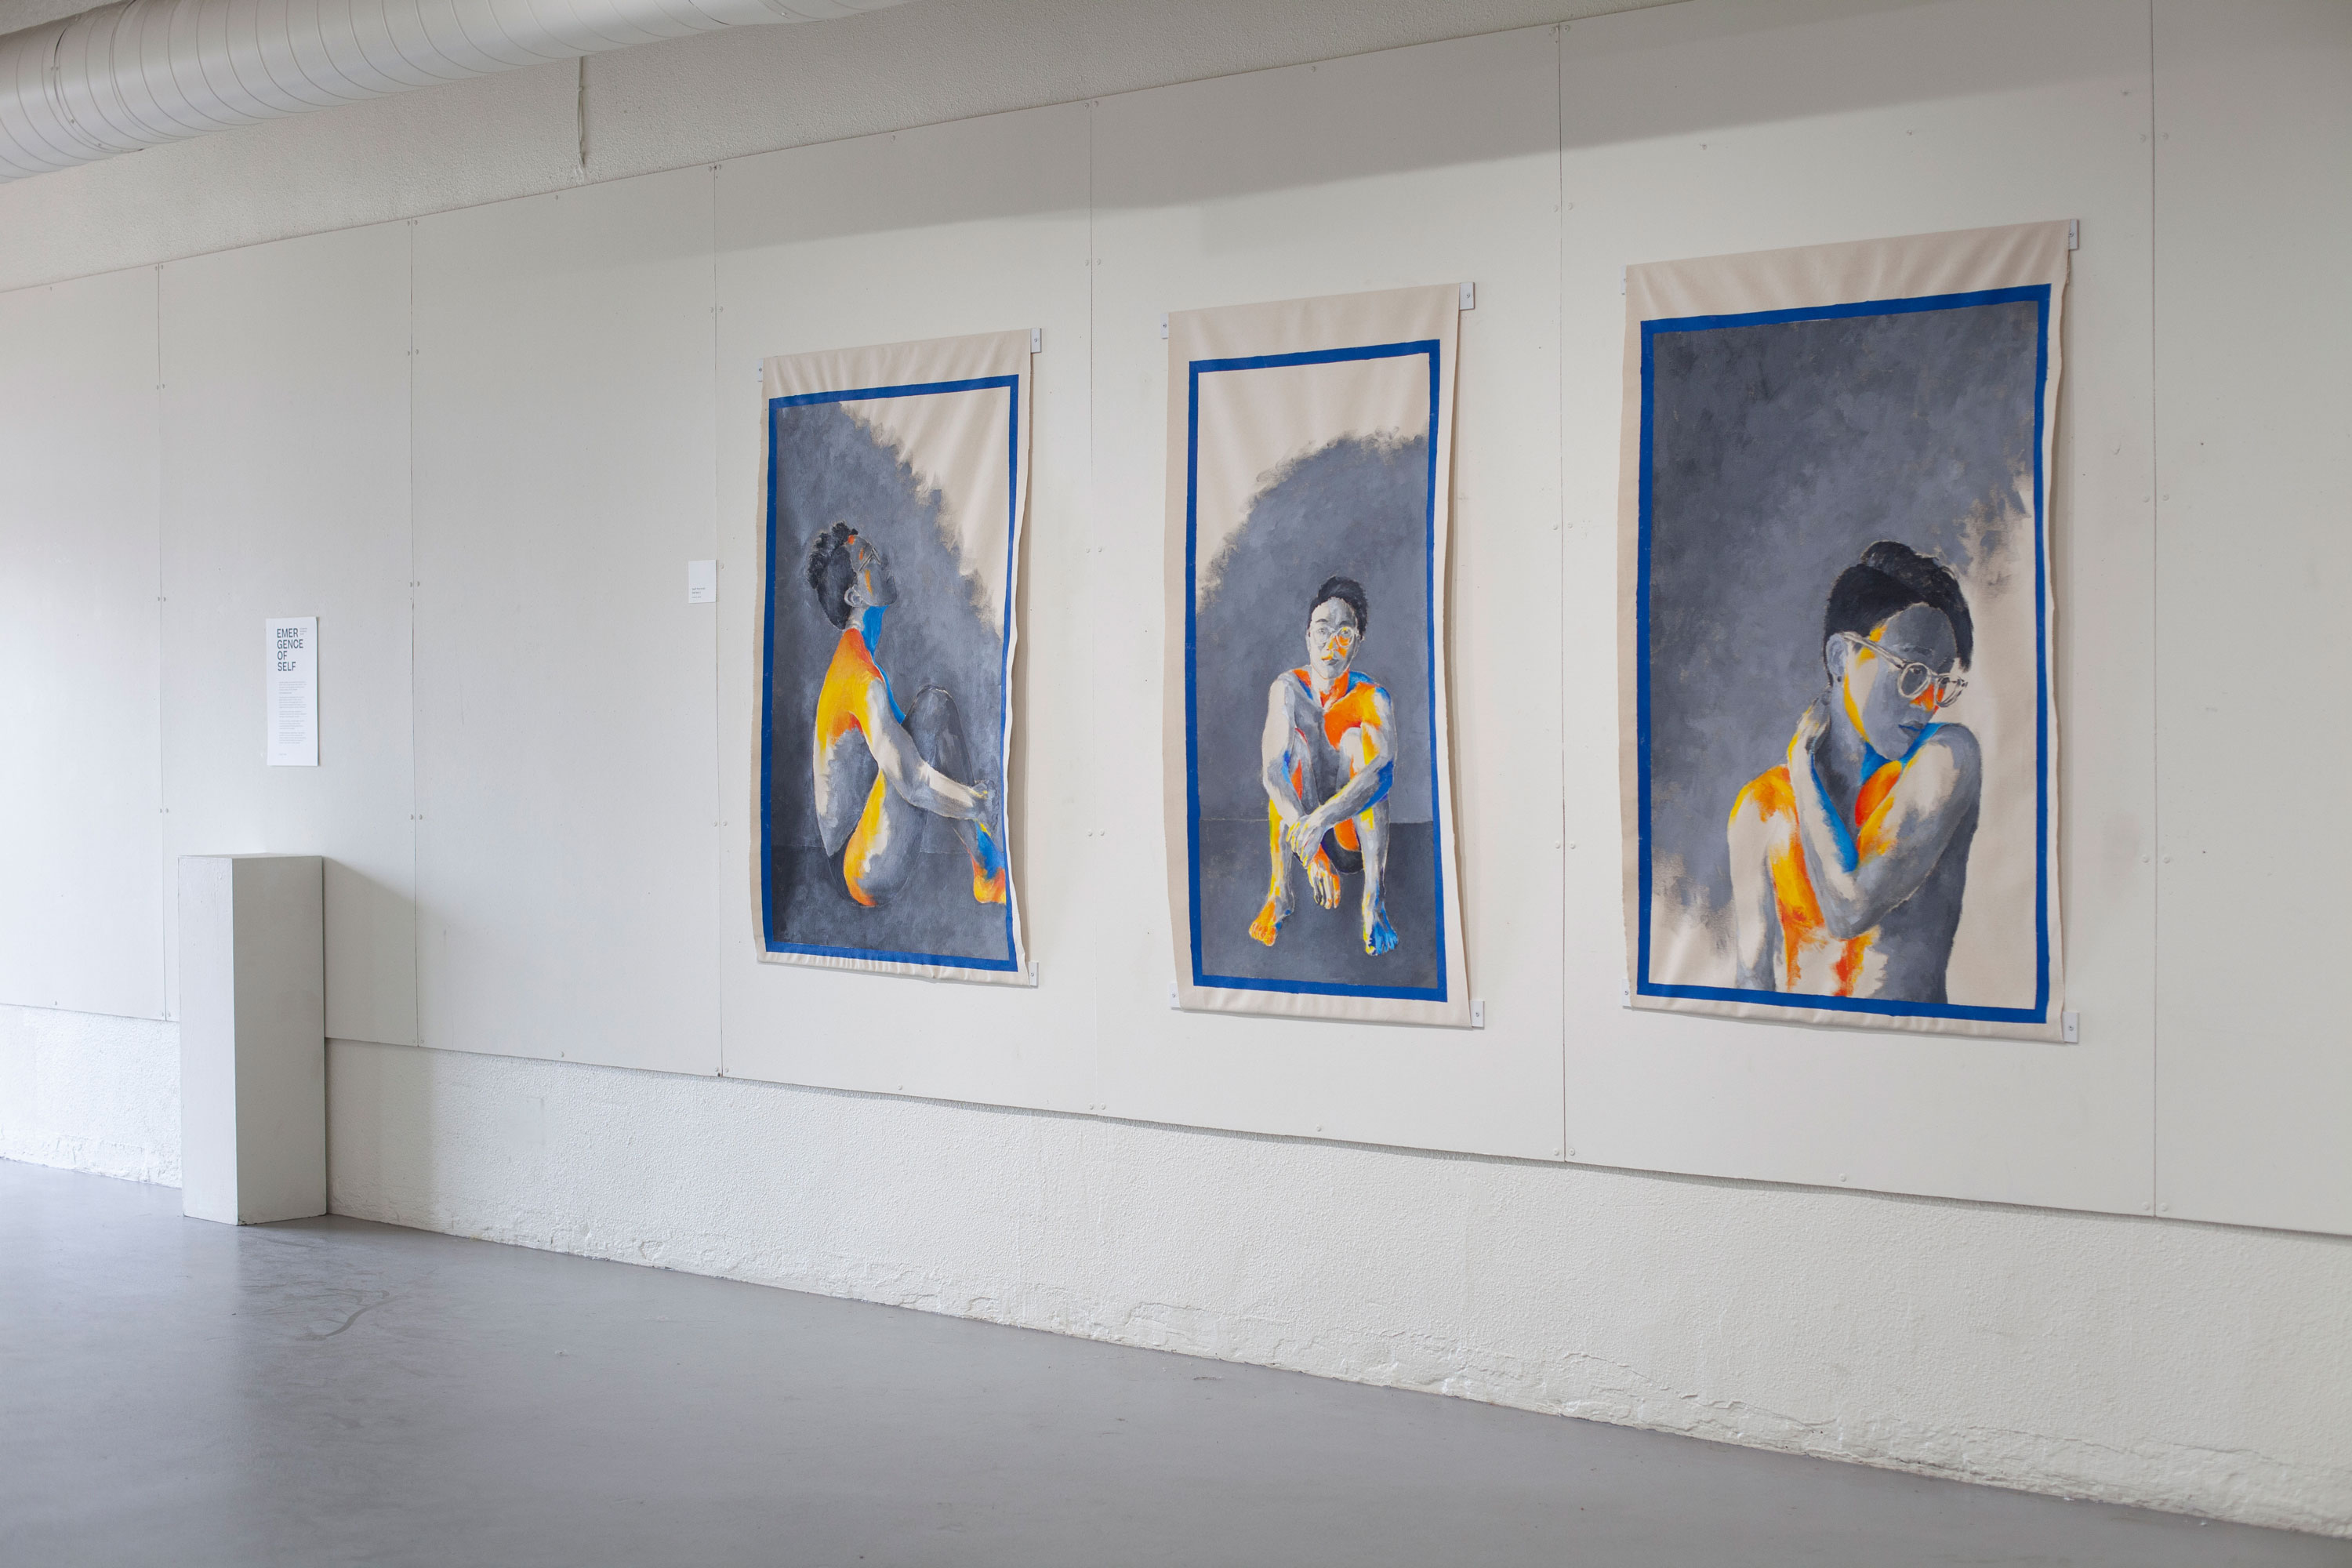 three large canvas paintings about 6 feet tall, pinned onto a spacious wall